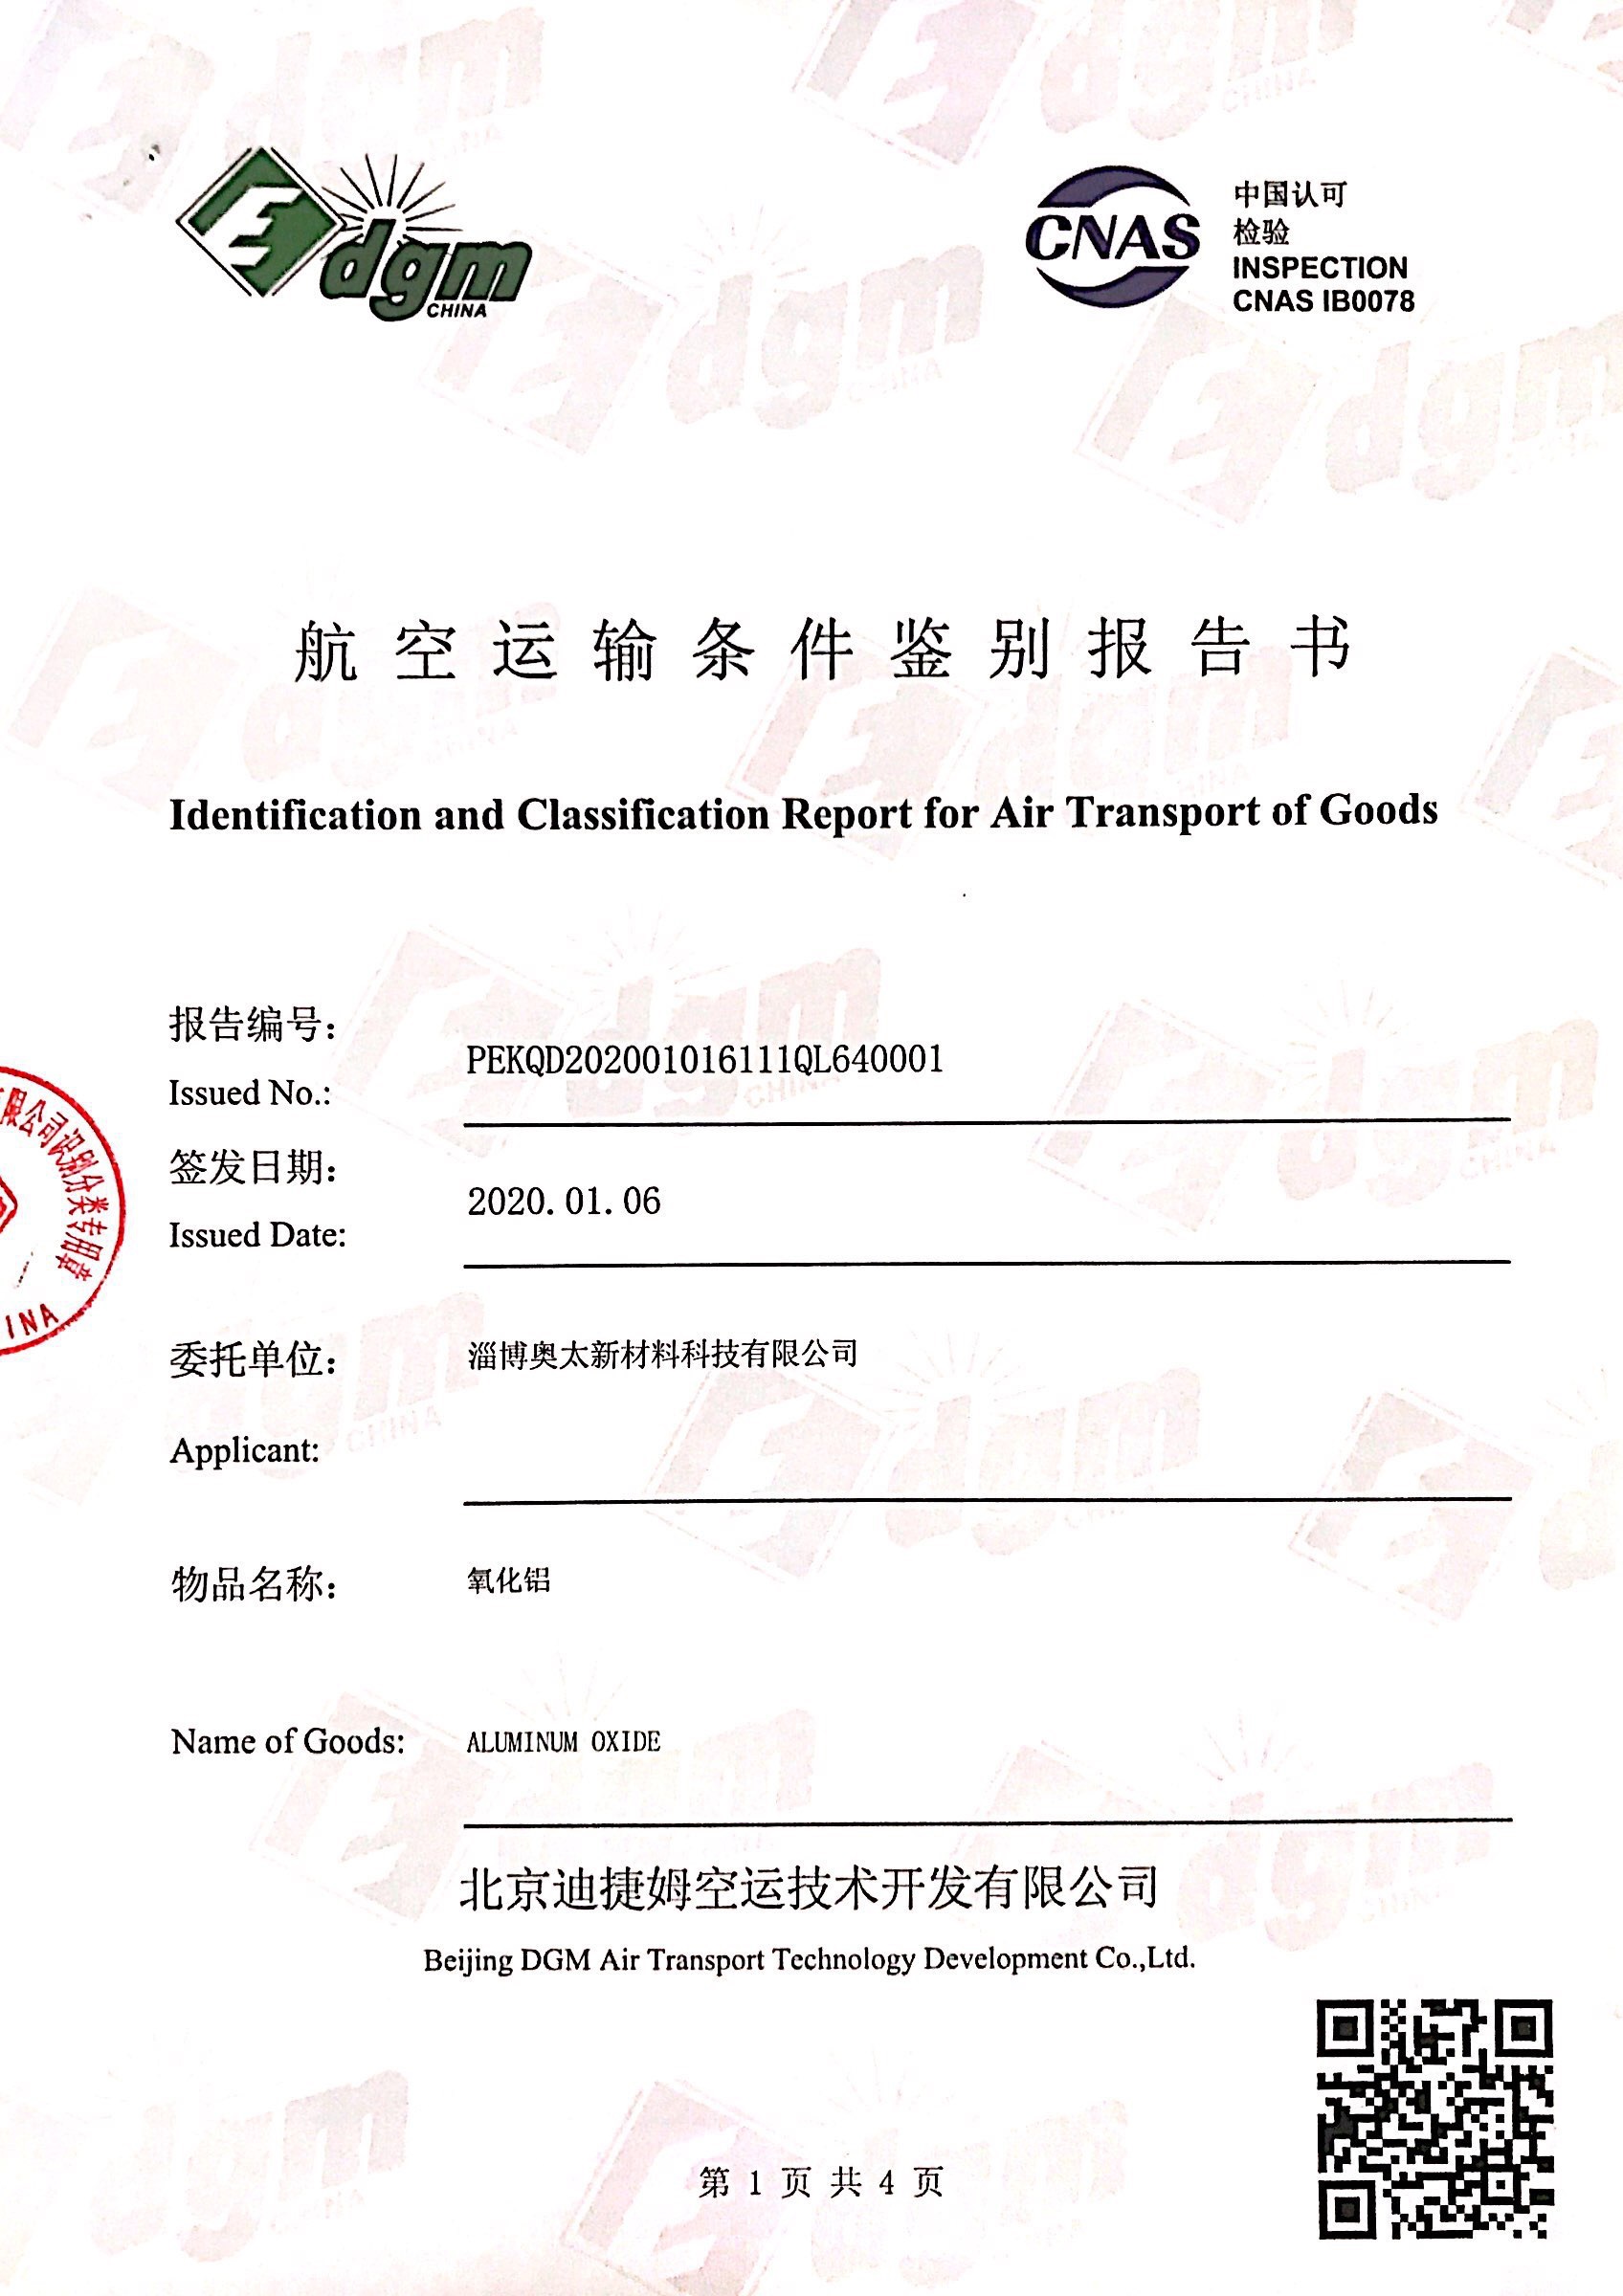 Identification and Classification Report For Air Transport of Goods